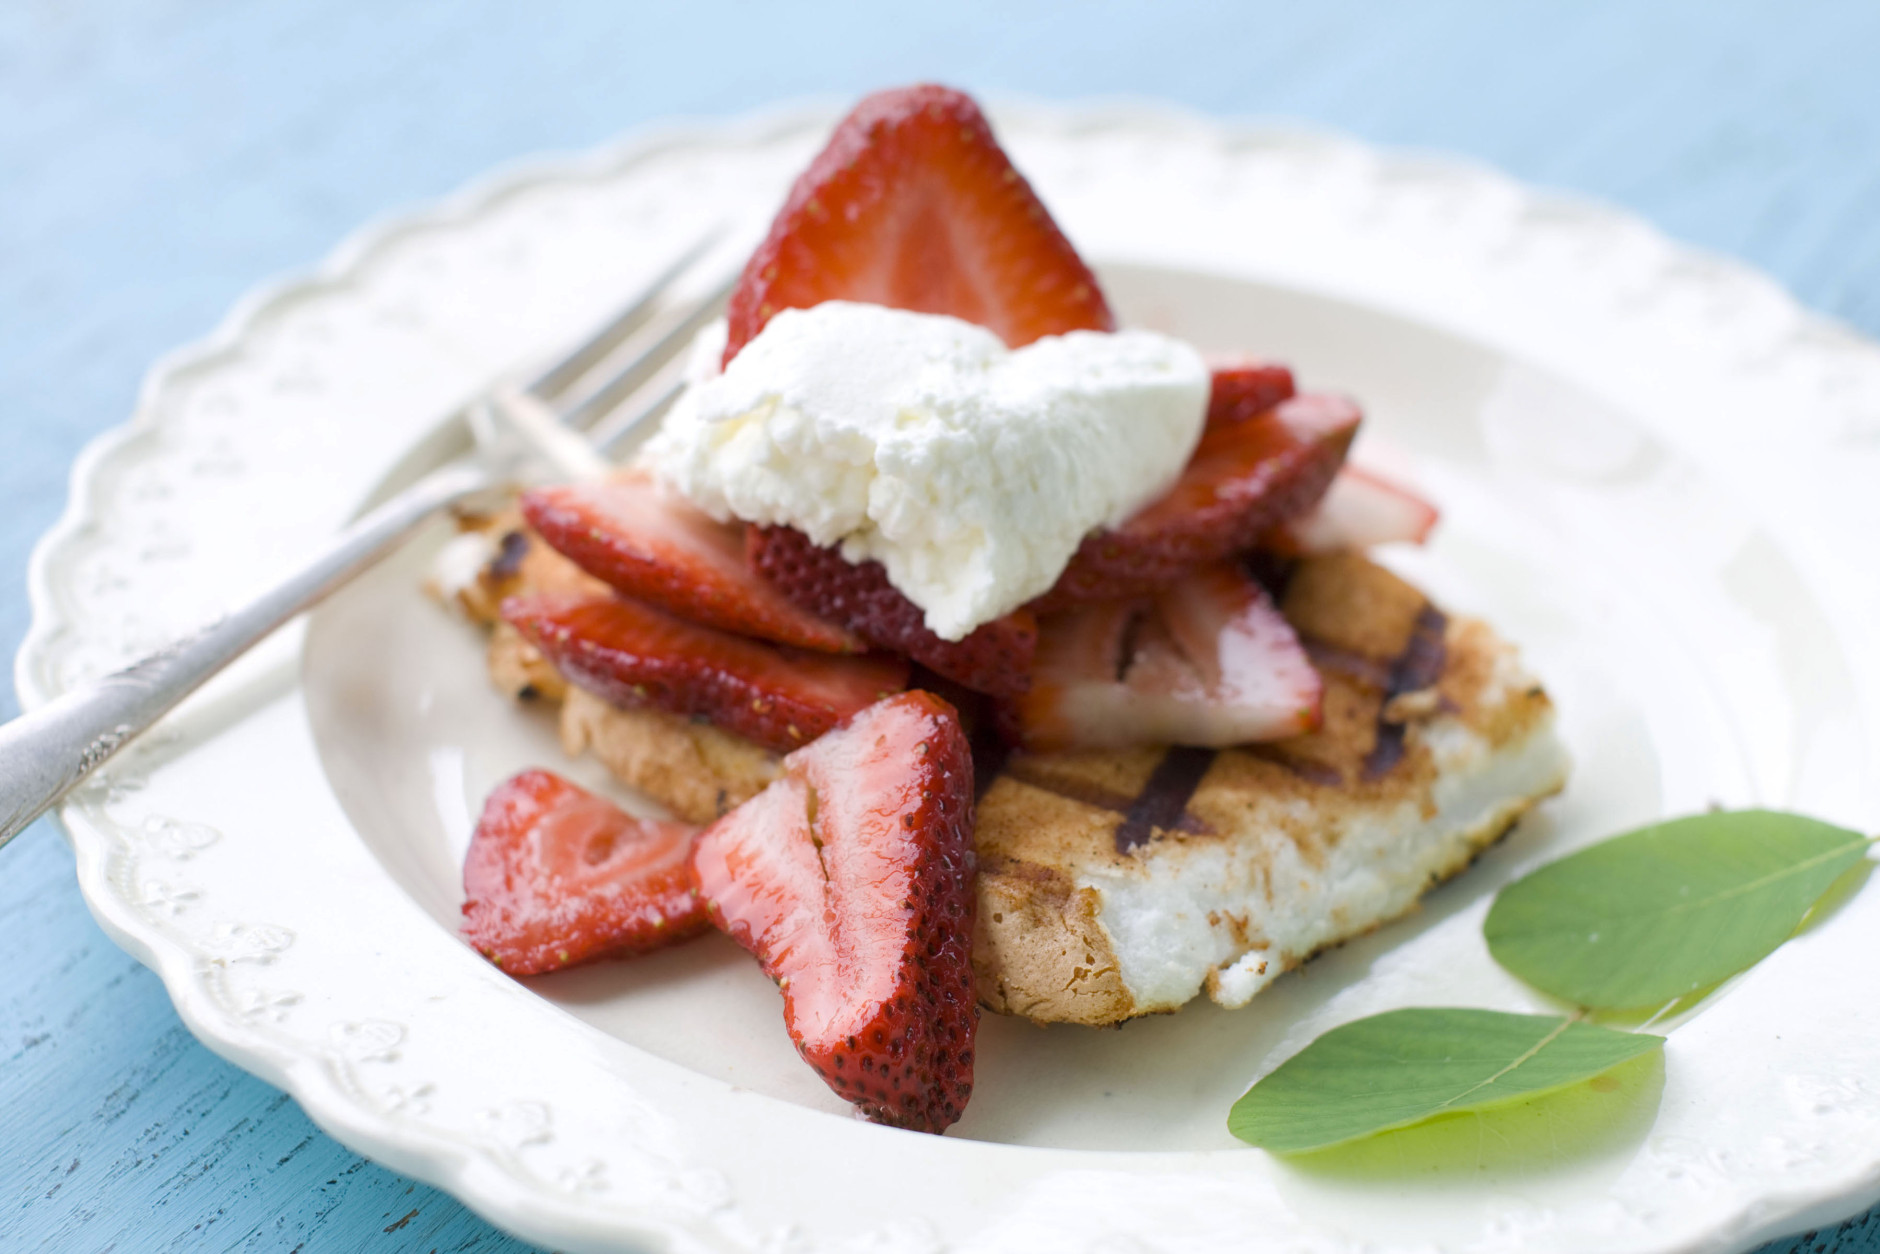 This May 30, 2012 image shows a dessert of spiced and grilled angel food cake with strawberries and whipped cream in Concord, N.H. (AP Photo/Matthew Mead)